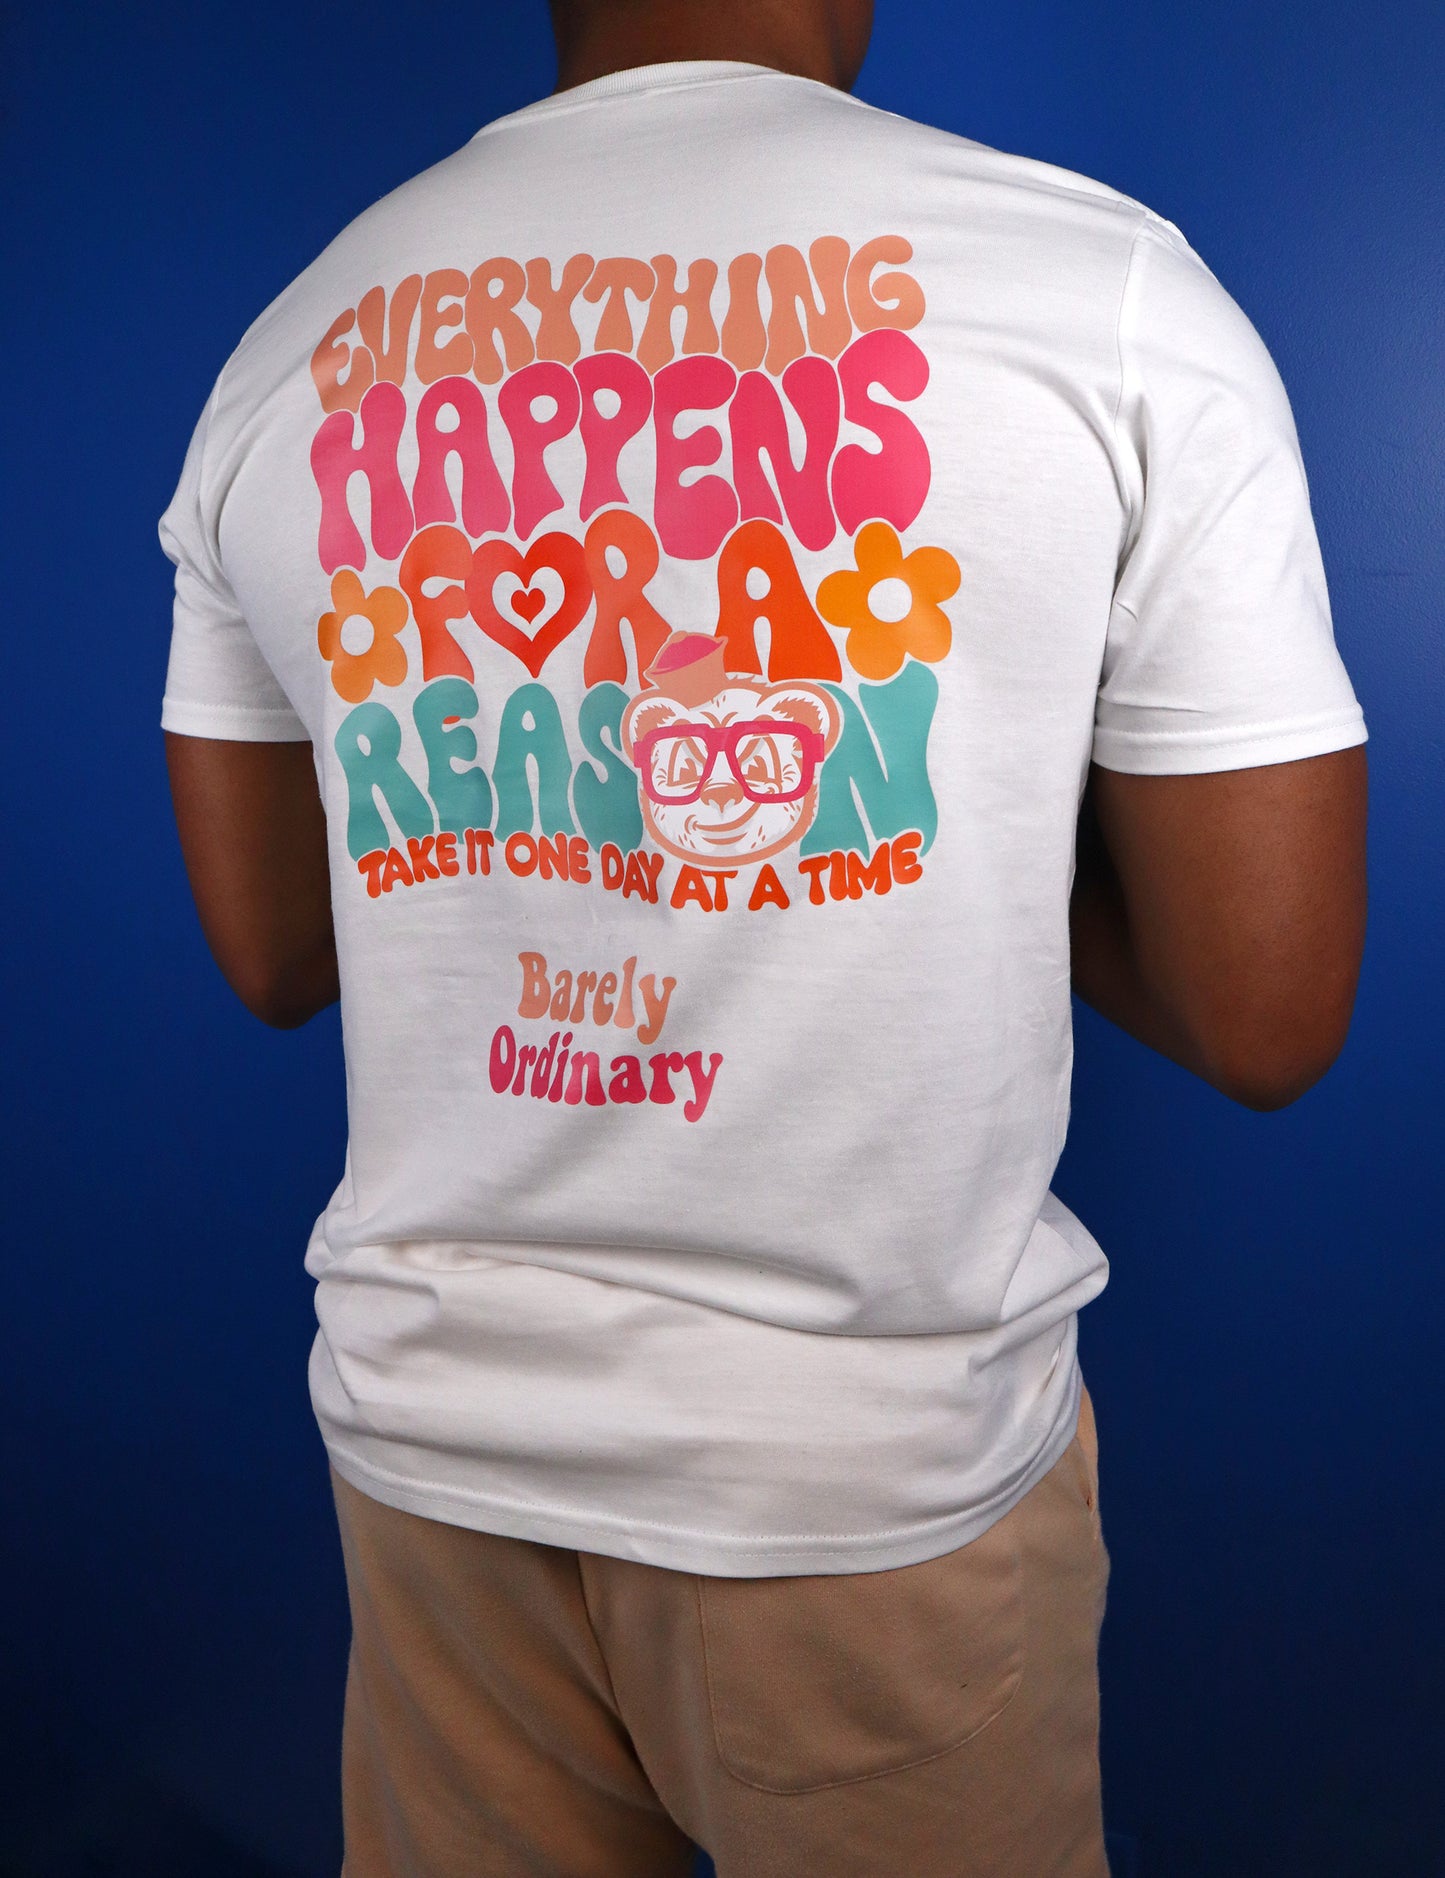 Barely "One Day At A Time" Tee